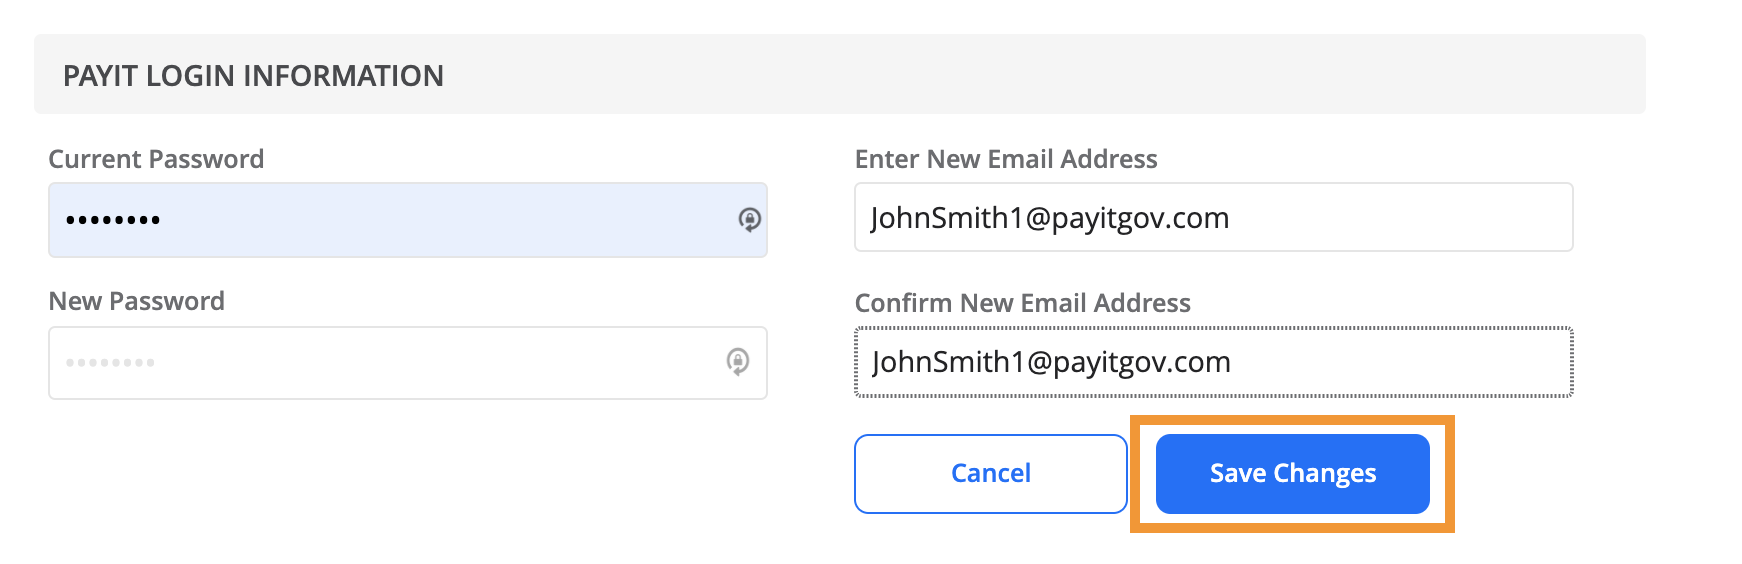 how to change email address on my microsoft account